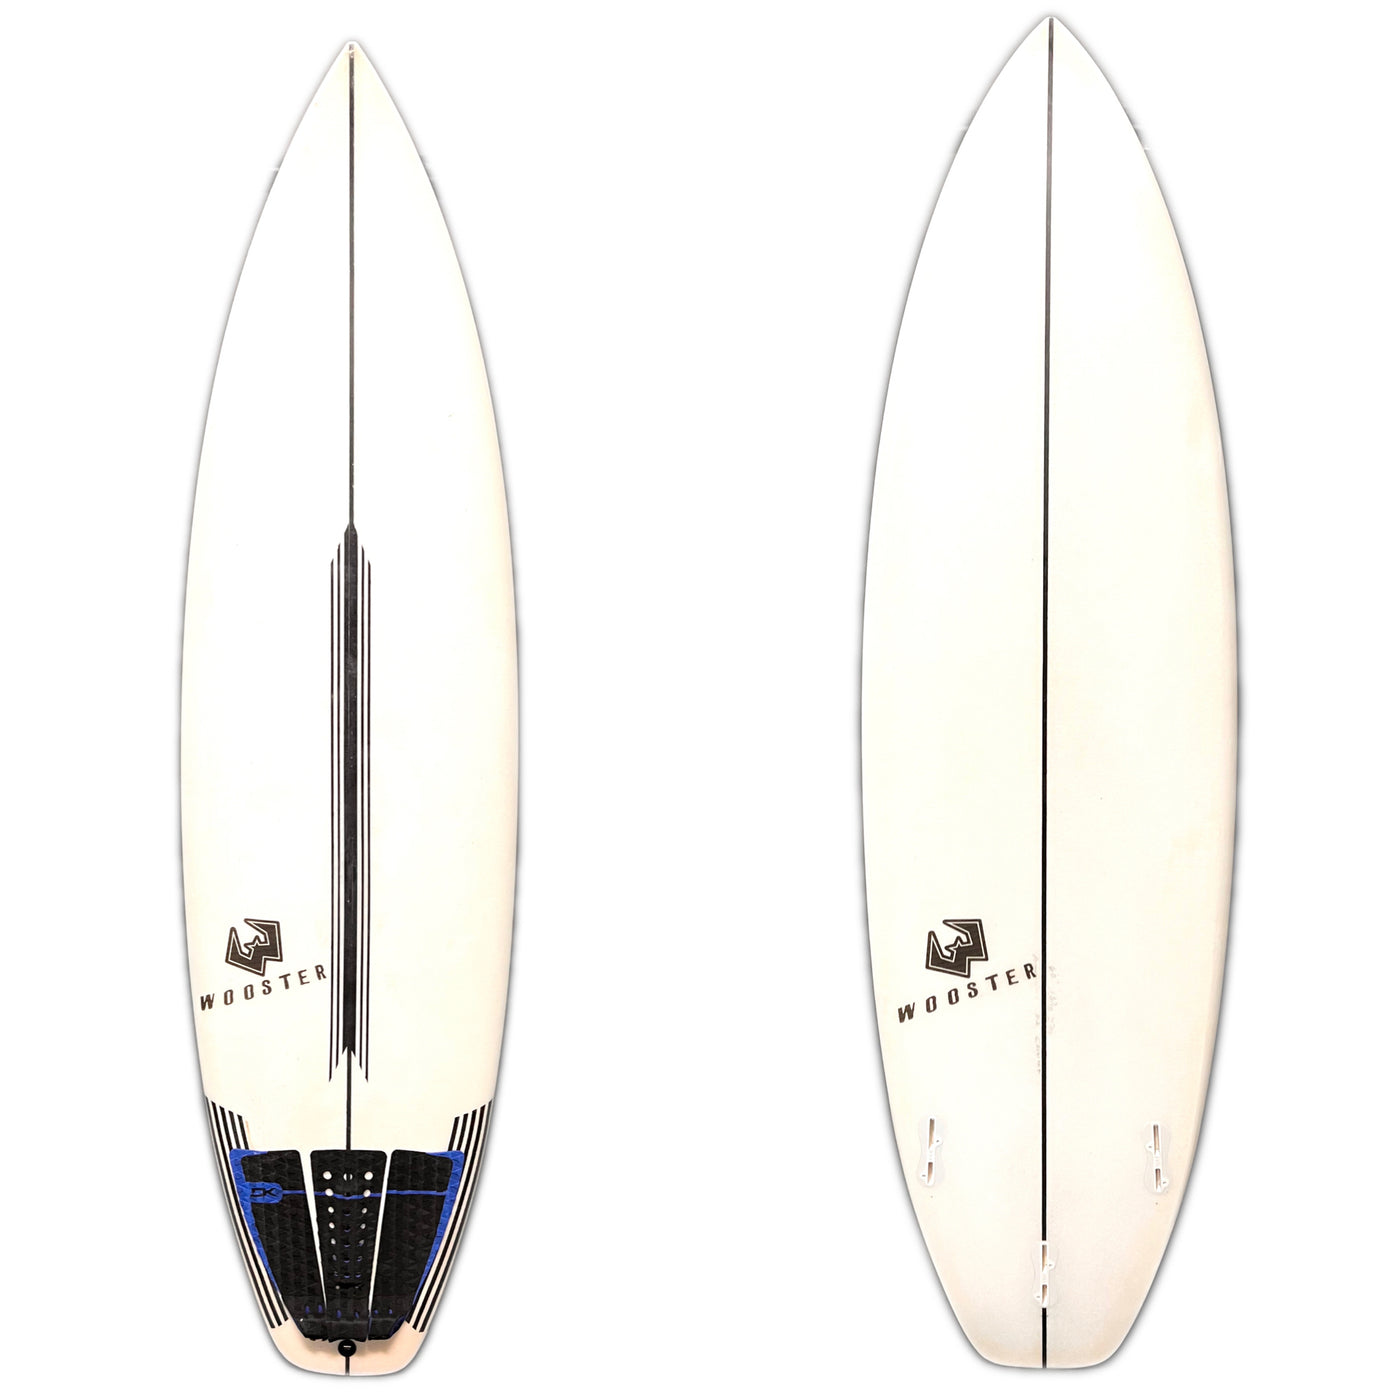 Used 6'0" Wooster Surfboard